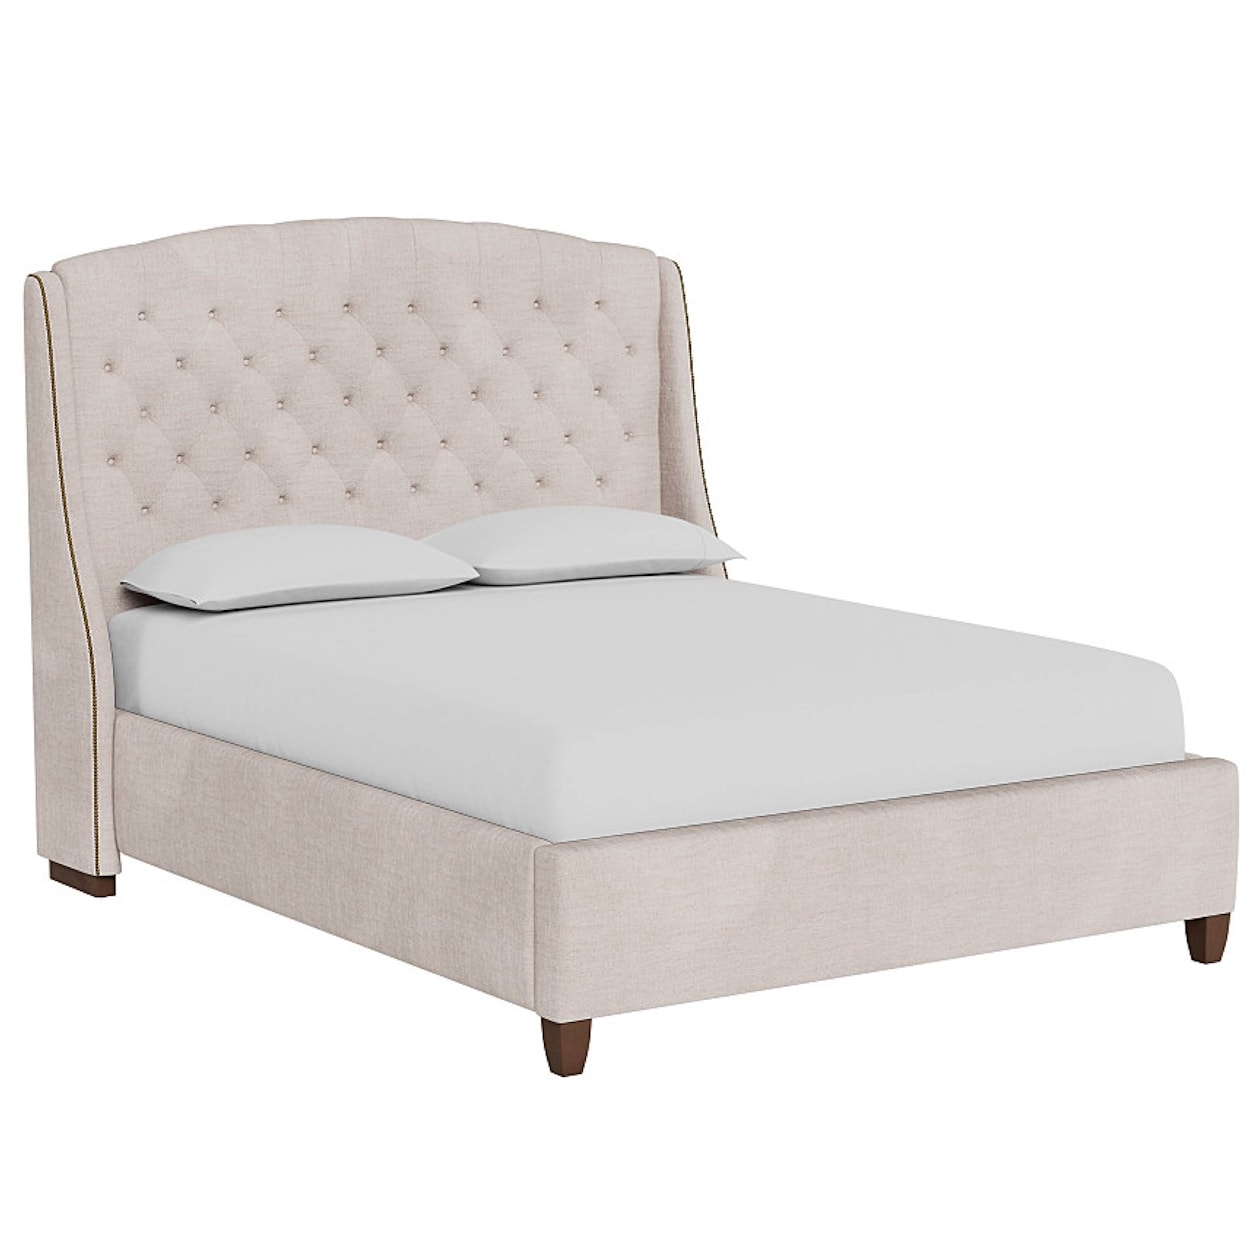 Universal Special Order Halston Bed